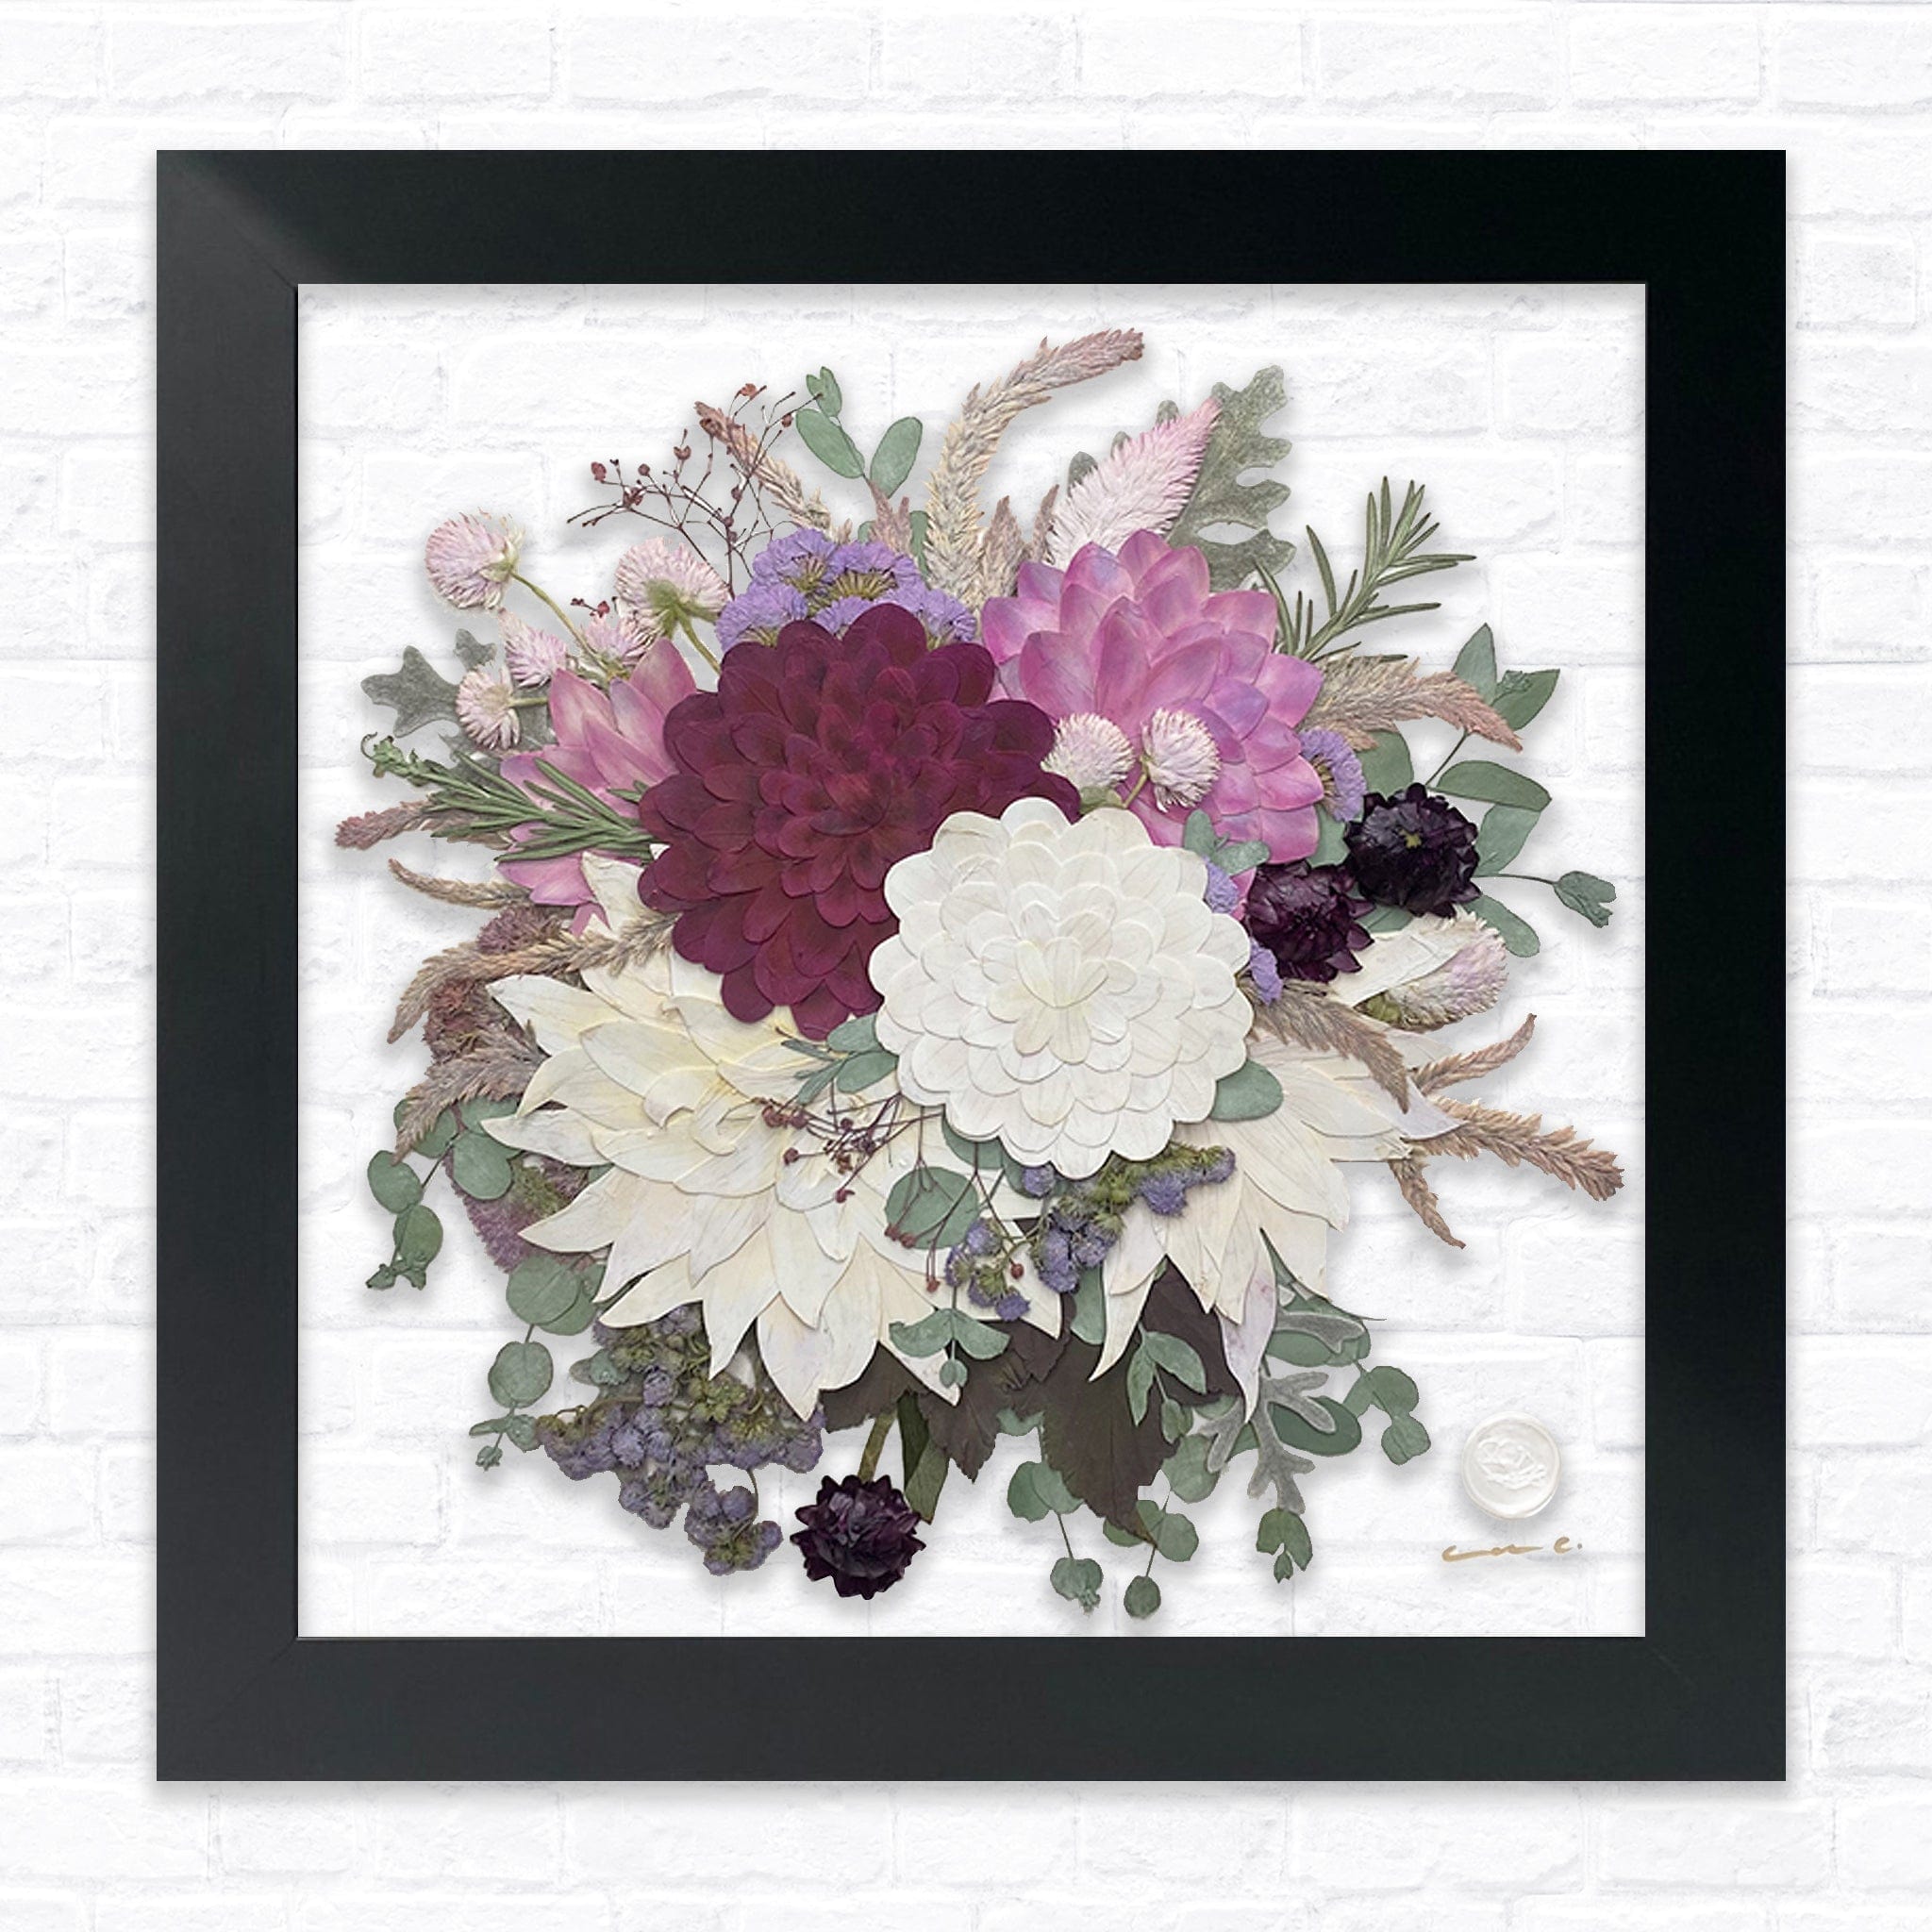 Designs by Andrea Pressed (Framed) Medium / 12" x 12" / Square 12" x 12" Floating Frame